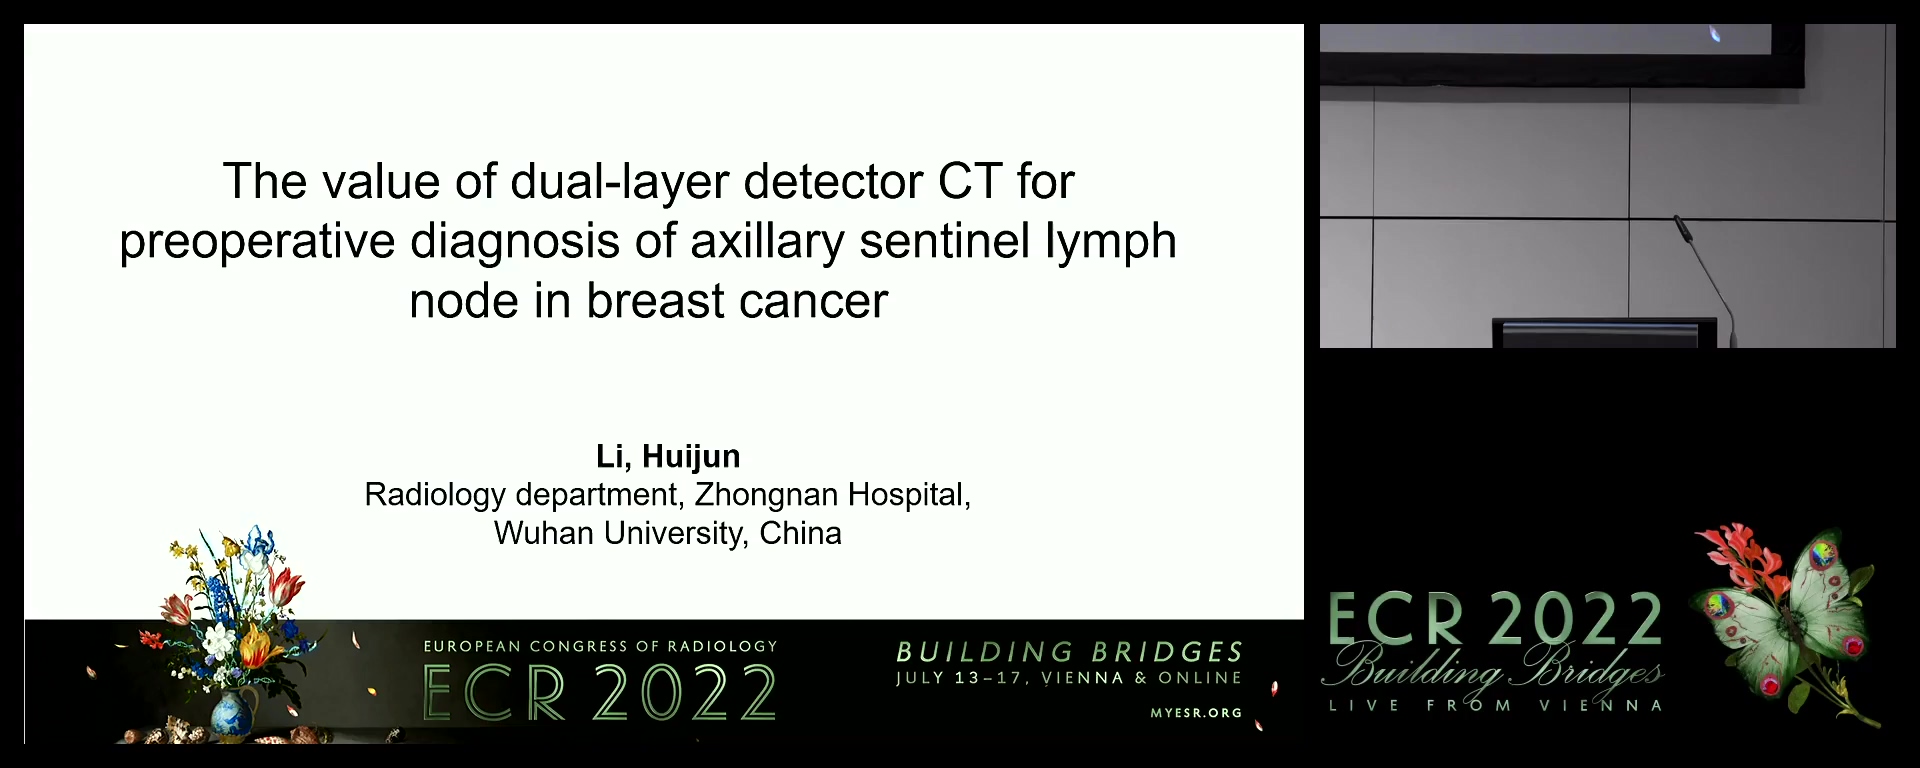 The value of dual-layer detector computed tomography for preoperative diagnosis of axillary sentinel lymph node in breast cancer